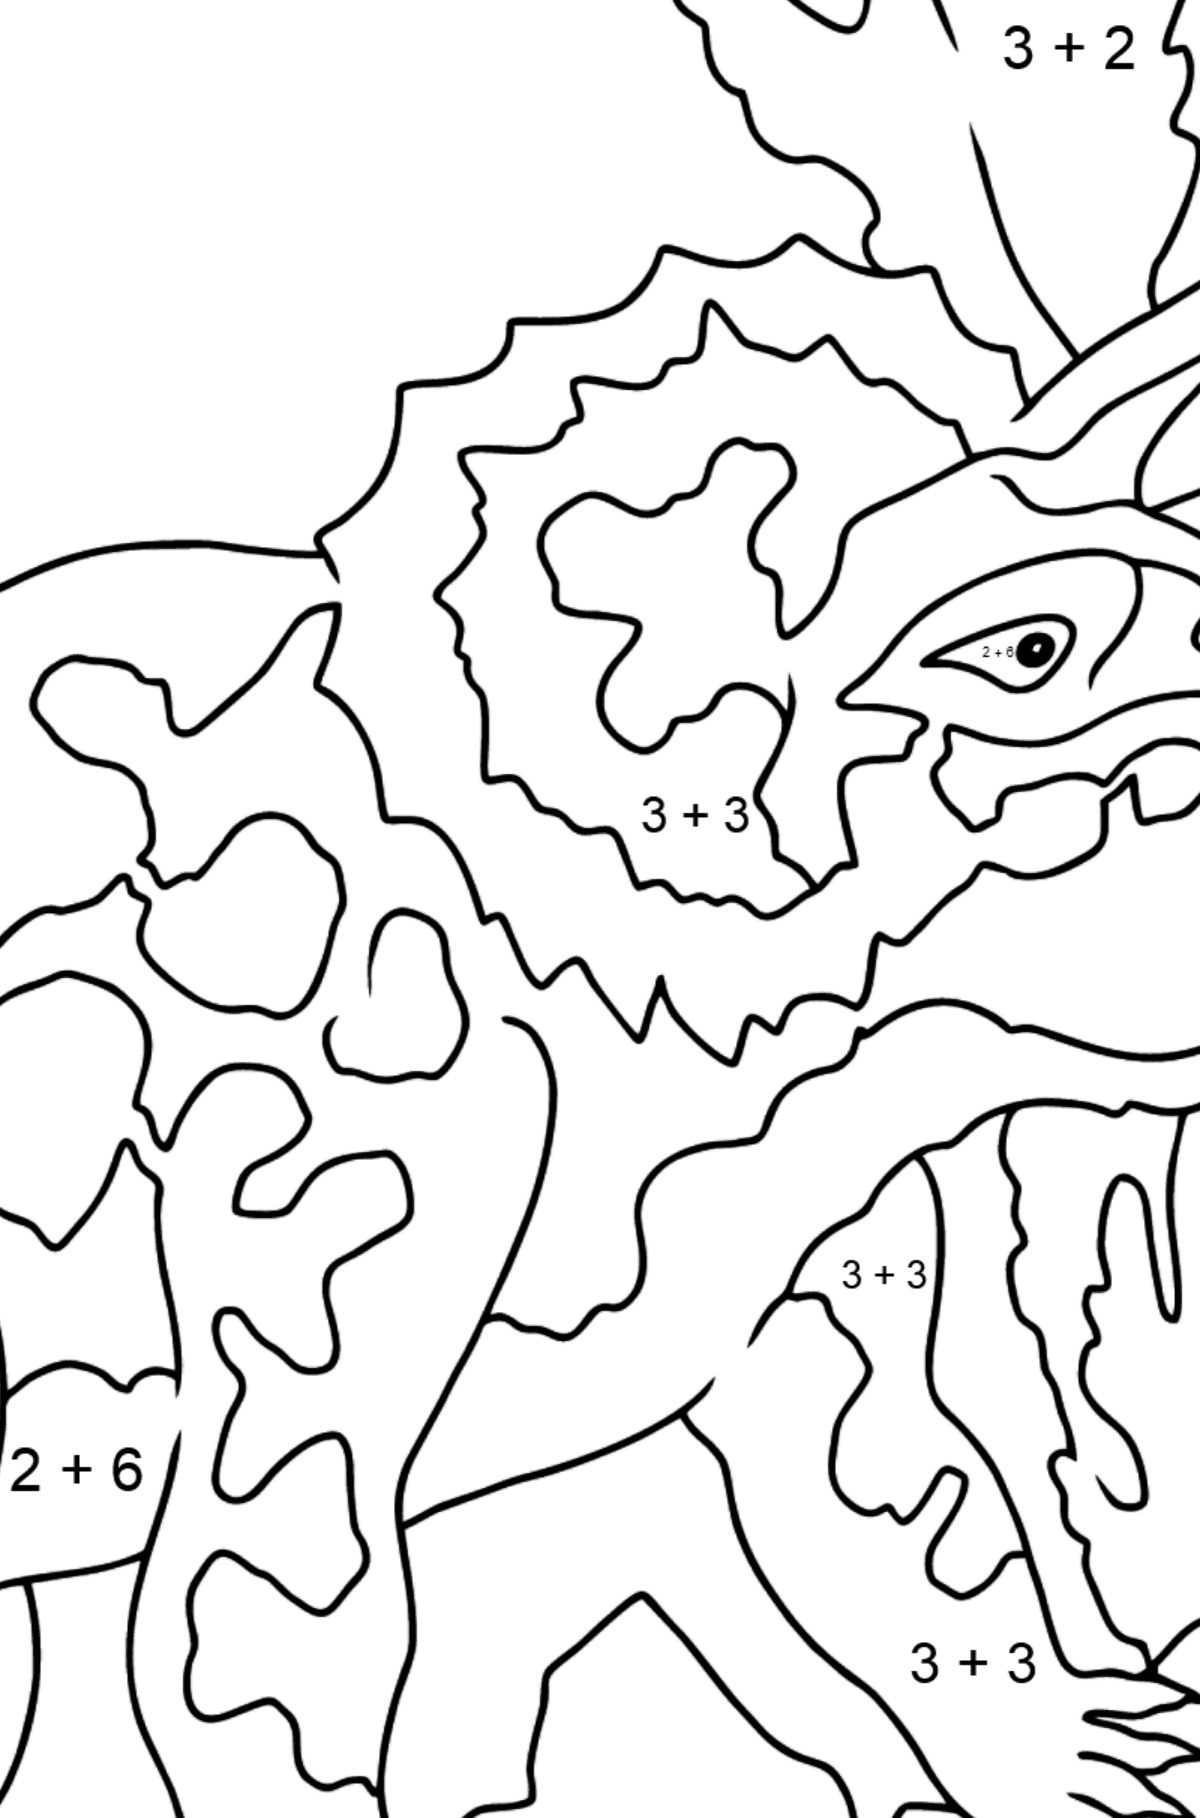 Triceratops Coloring Page - Math Coloring - Addition for Kids